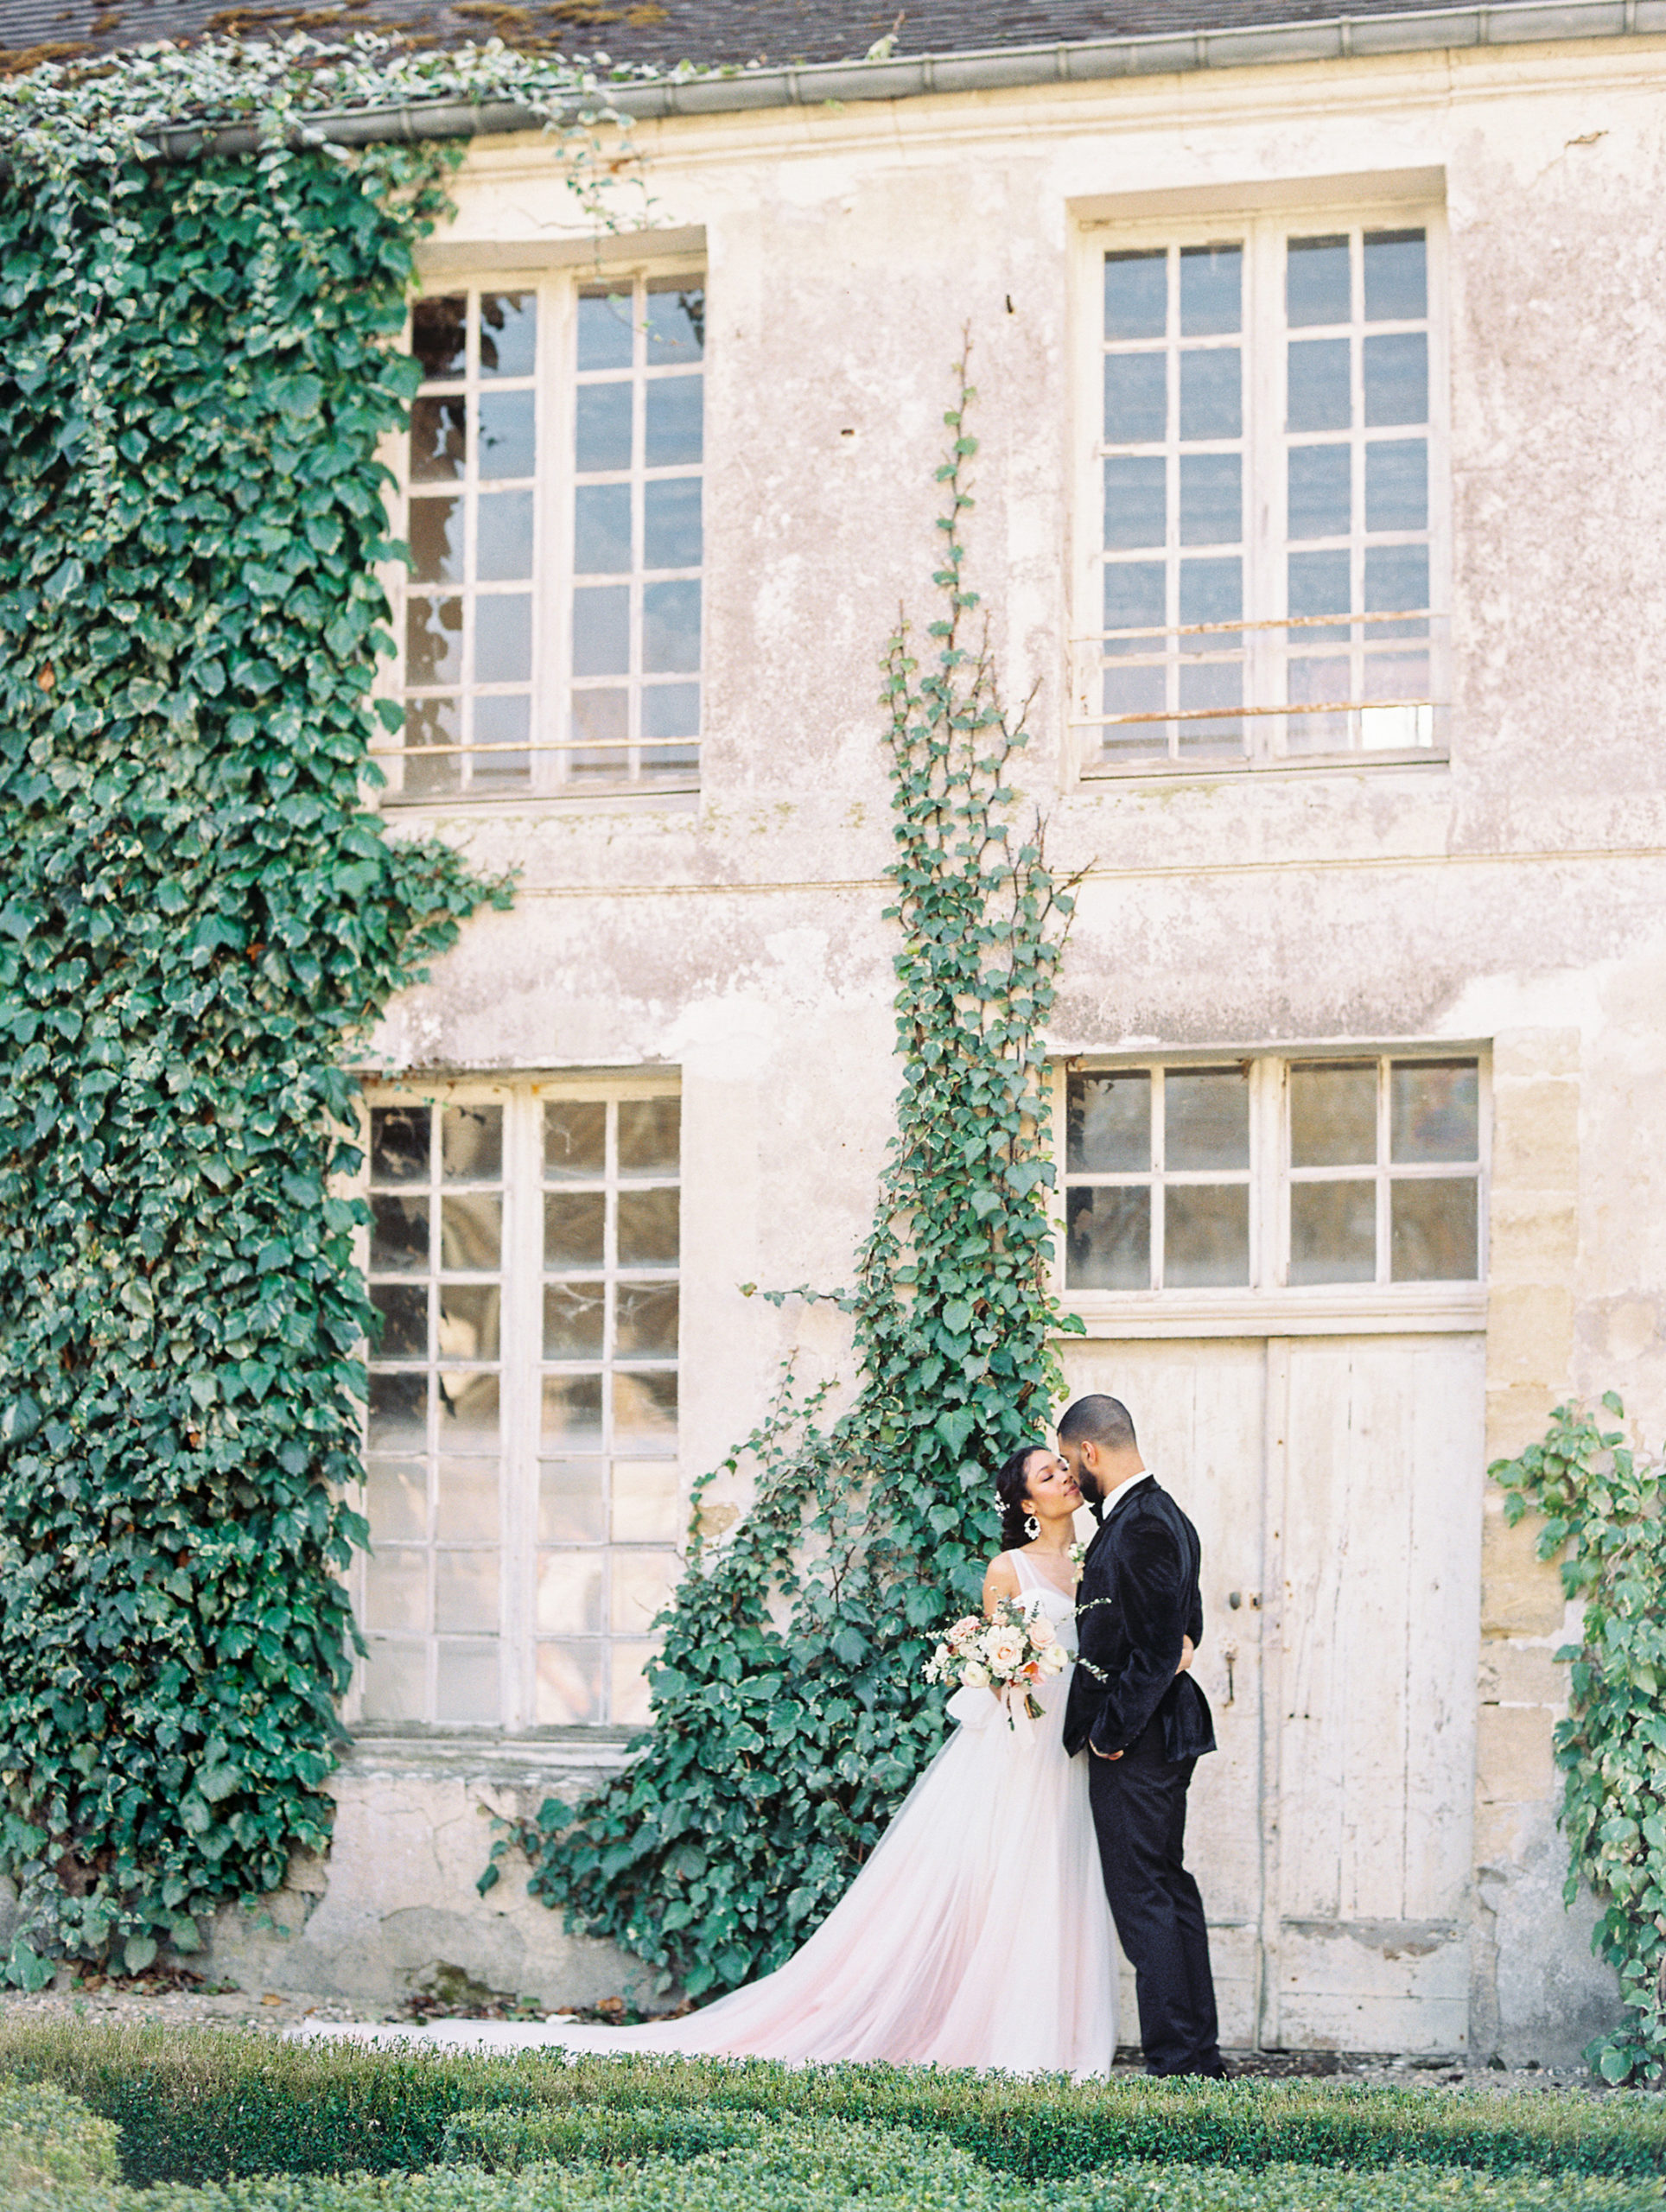 Bride and groom kiss in front of vine wall and stone estate at Chateau de Villette Wedding Photography